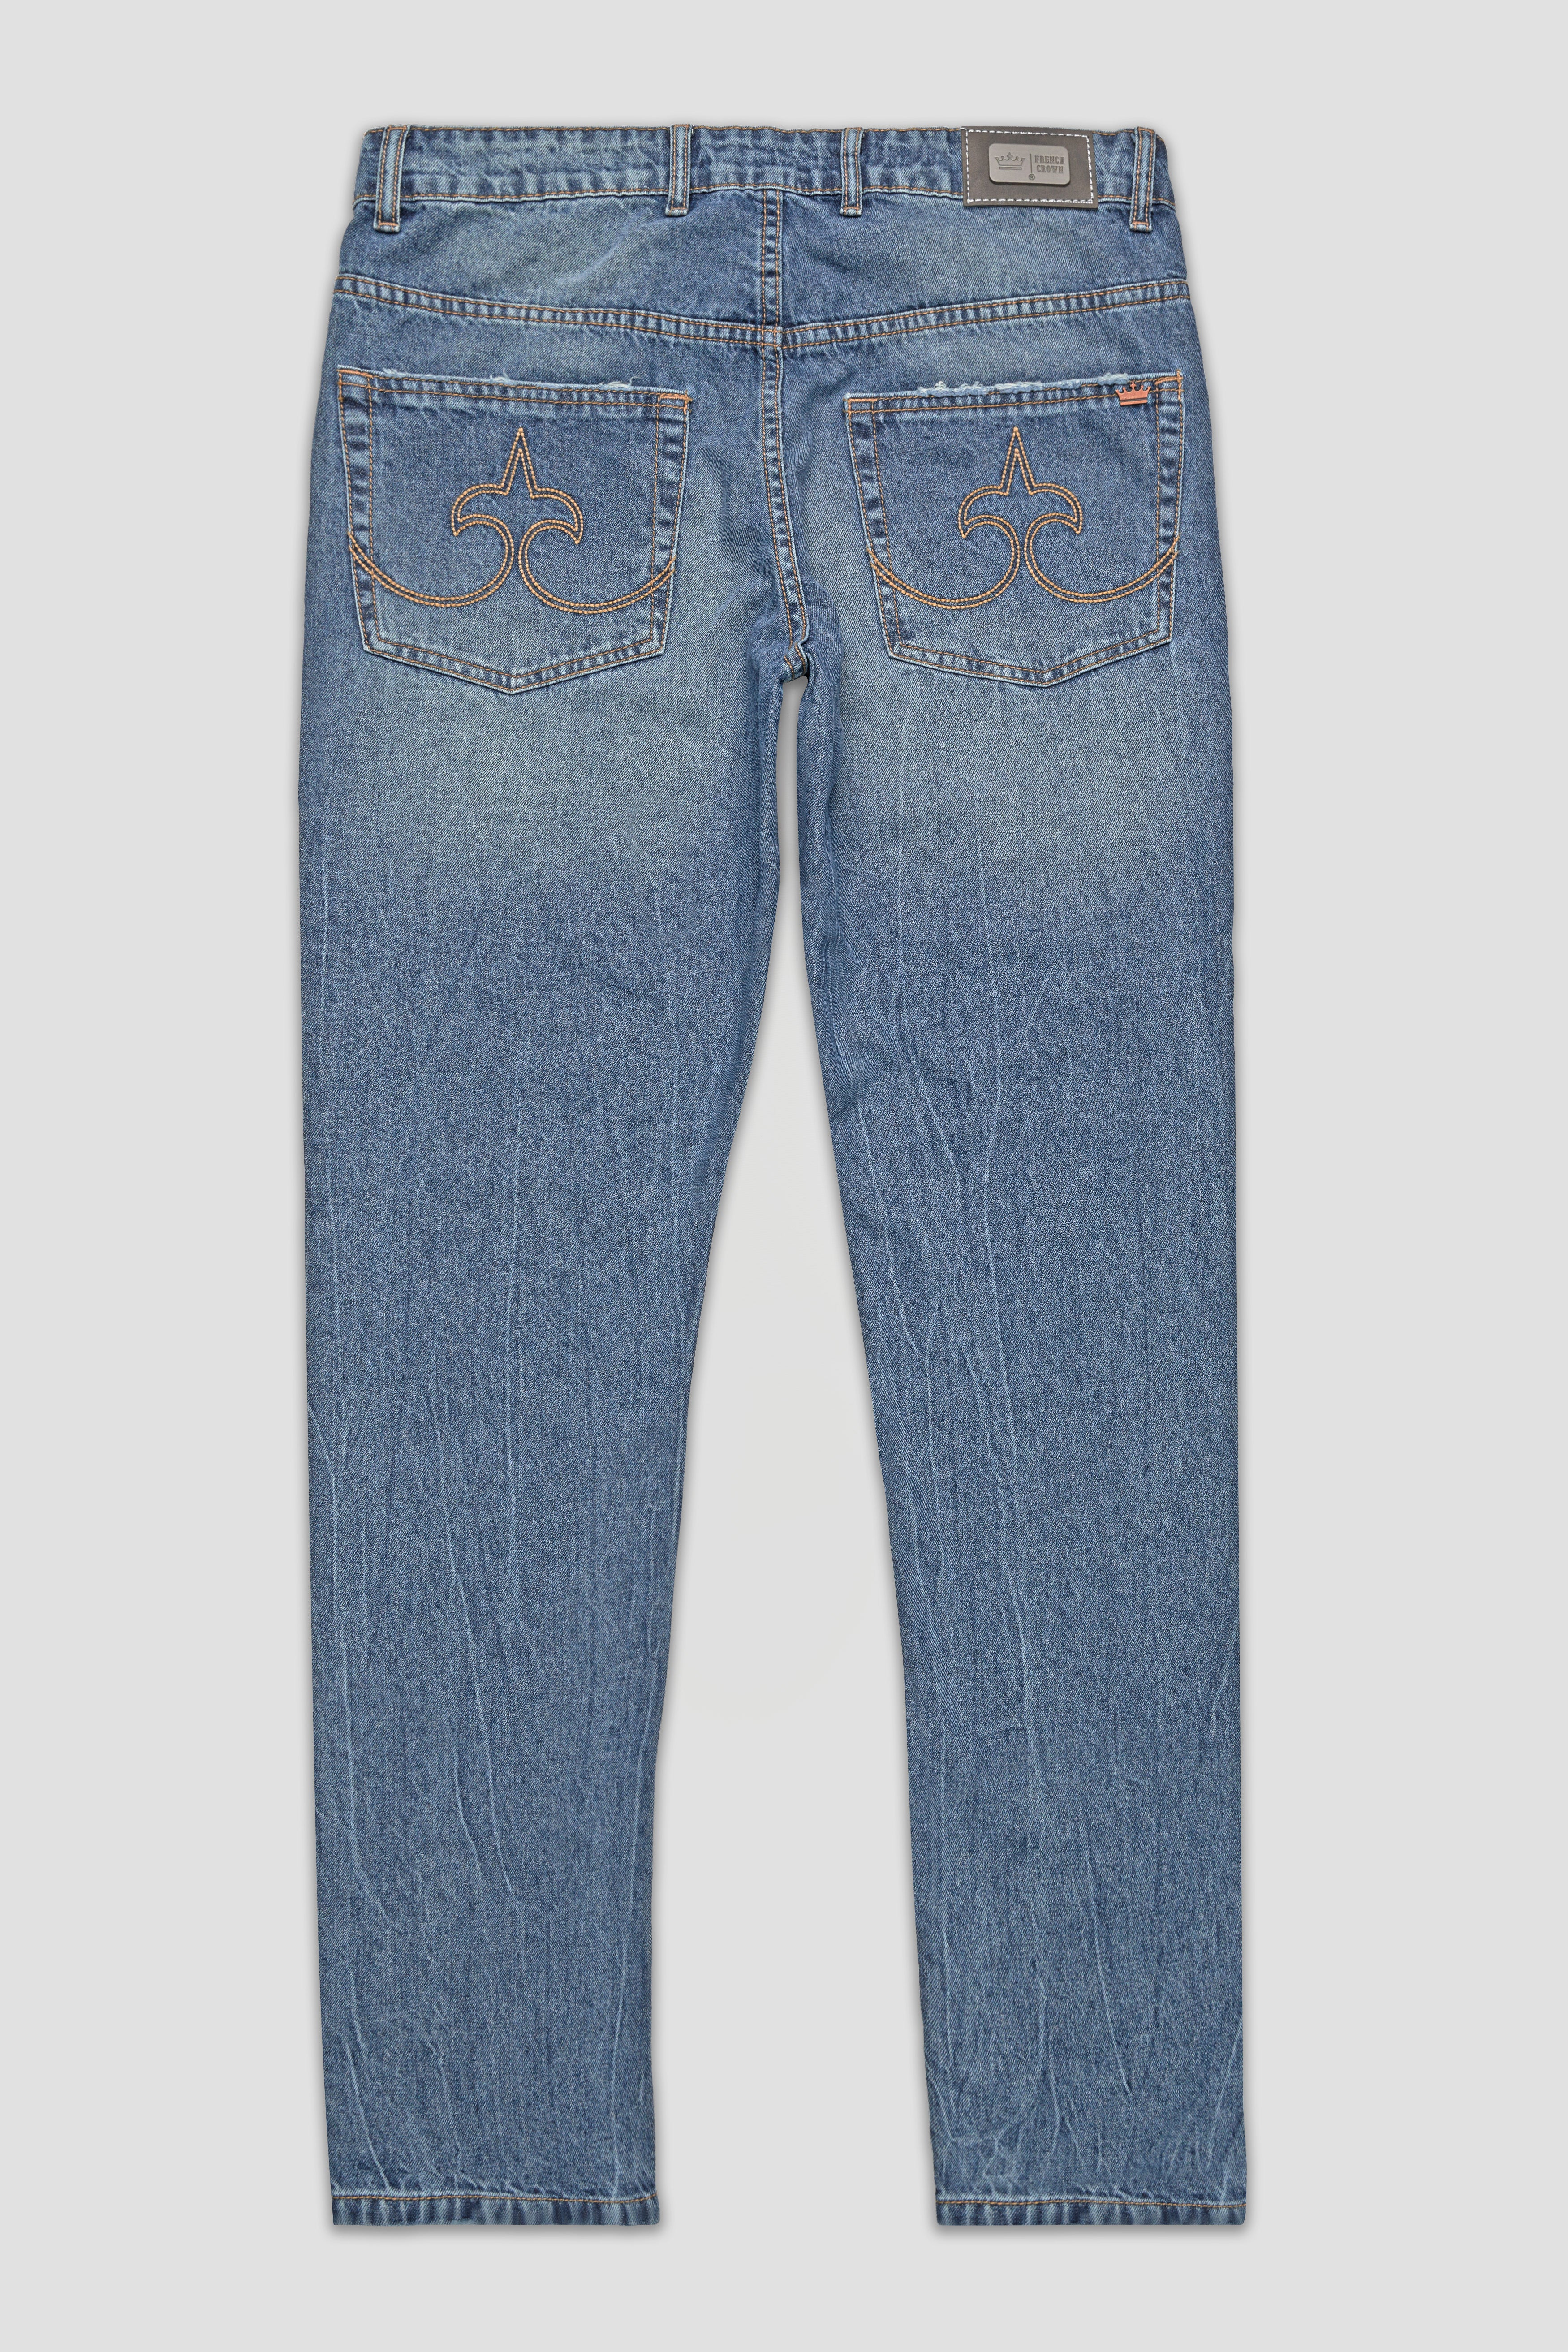 Buy Monsoon Blue Star Detail Embroidered Jeans from Next Hungary